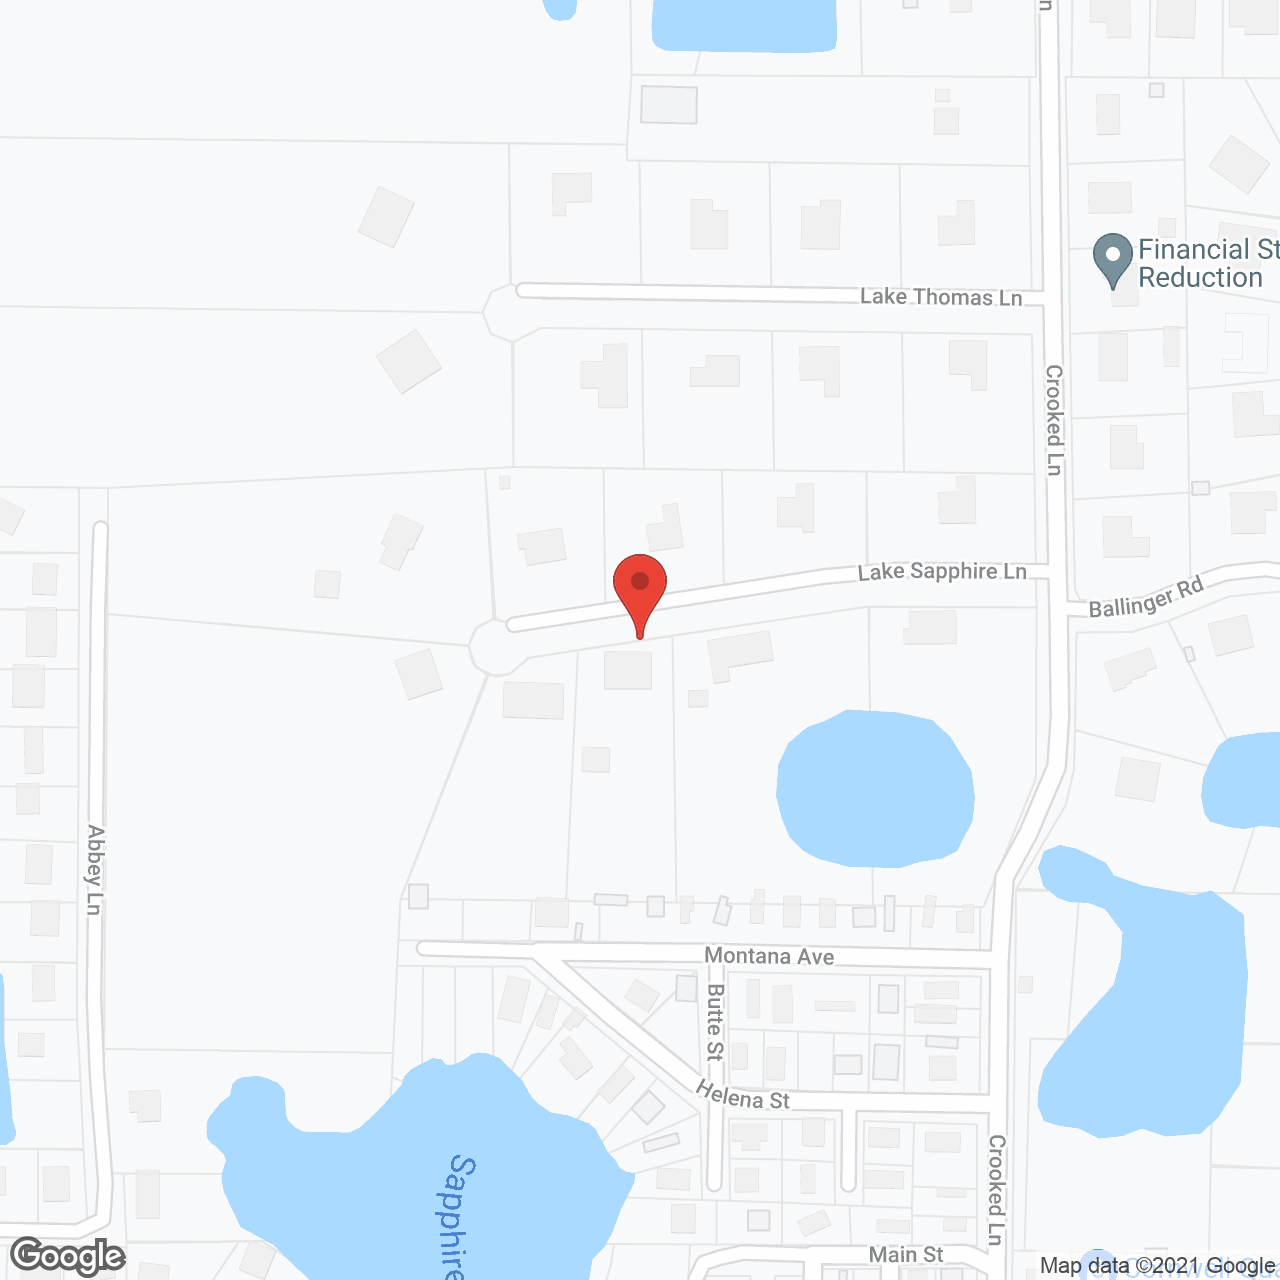 Angels Senior Living at Lodges of Idlewild in google map